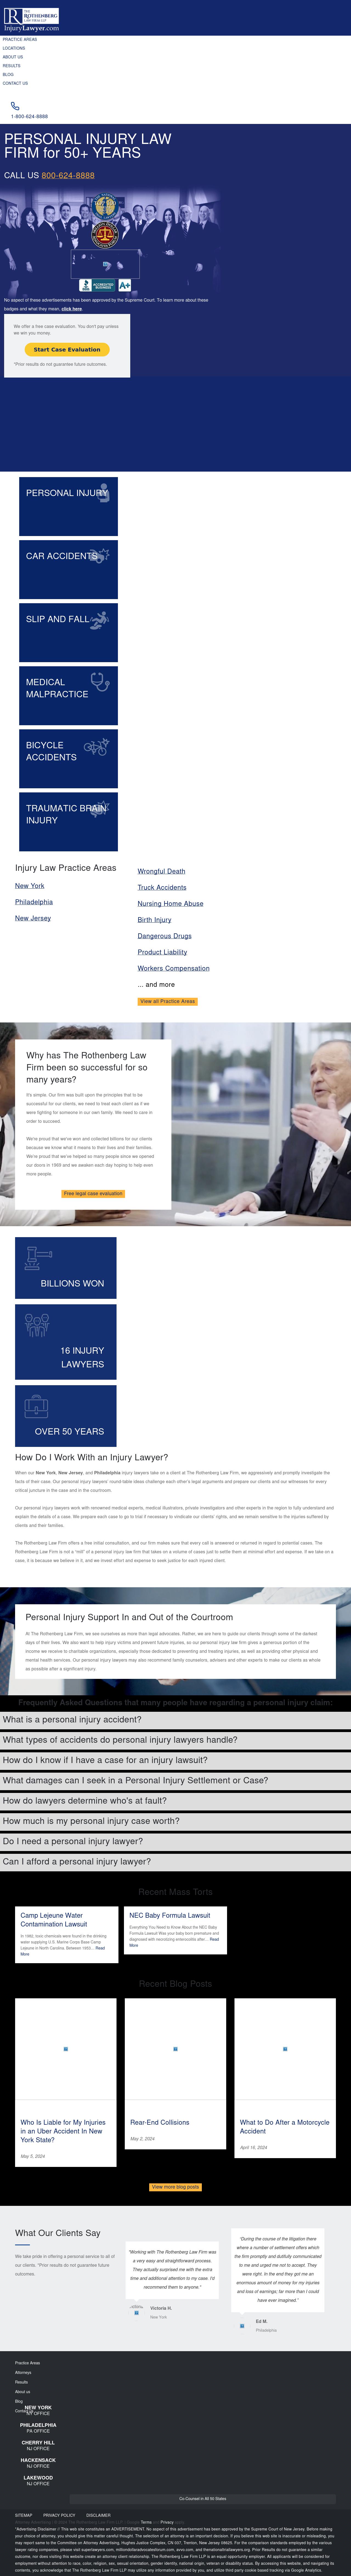 The Rothenberg Law Firm LLP - Hackensack NJ Lawyers